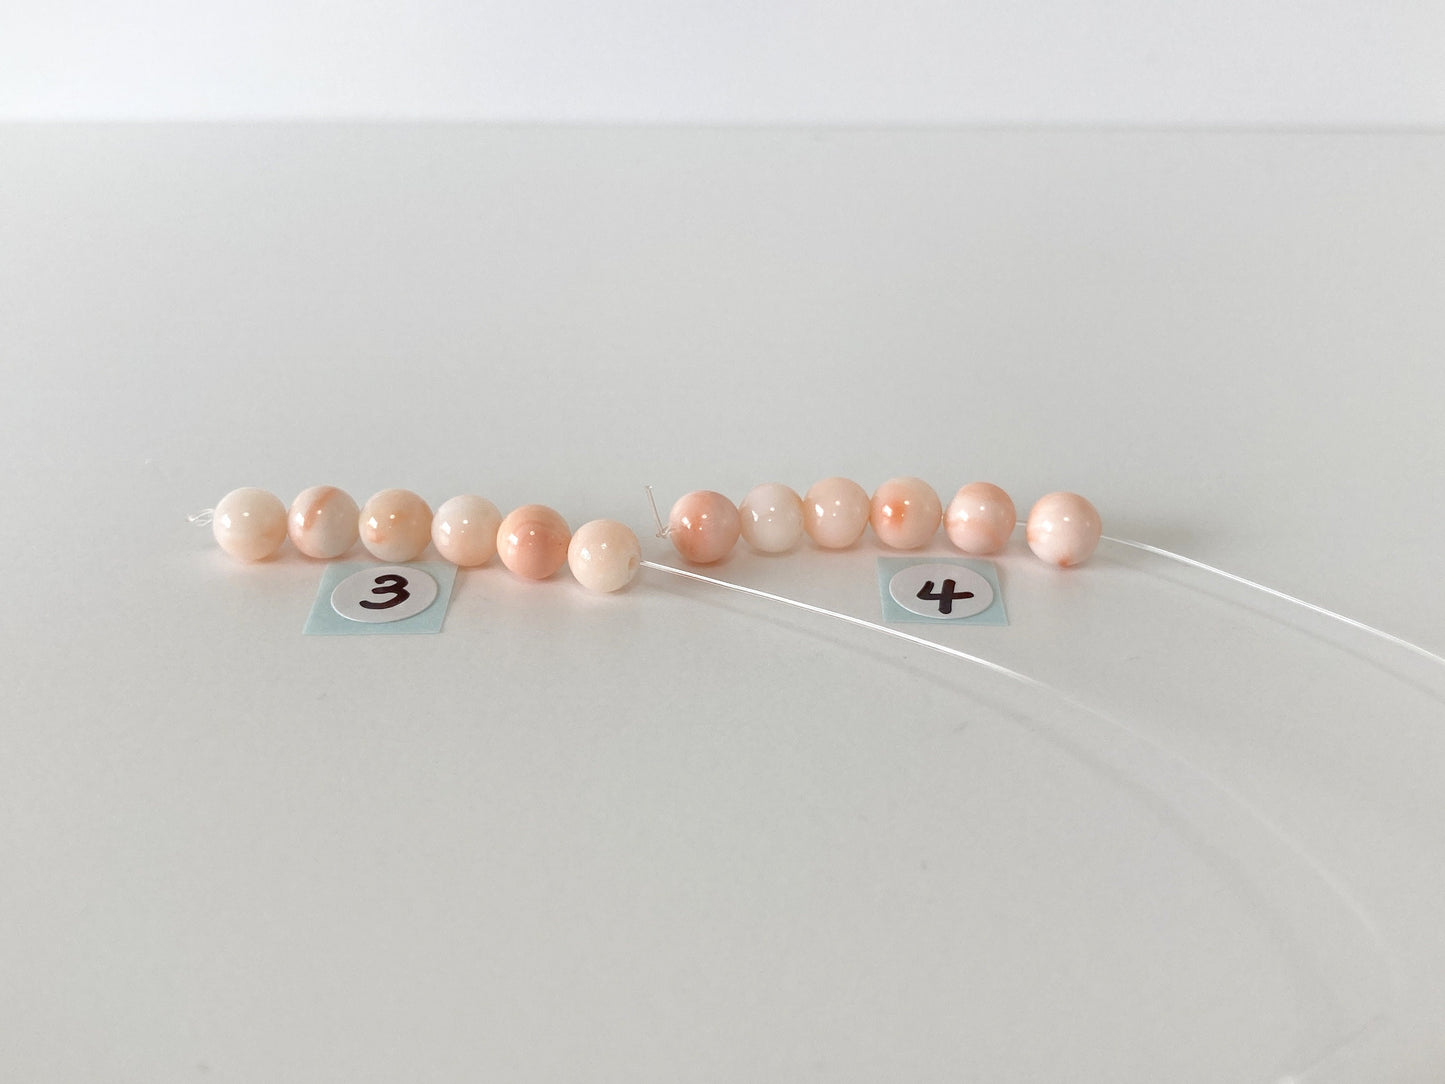 Reserved for Loes, #2 Short strand (6pcs) of Natural Deep sea coral round beads strand 5.5-6mm, natural Pink/White/Orange Color coral